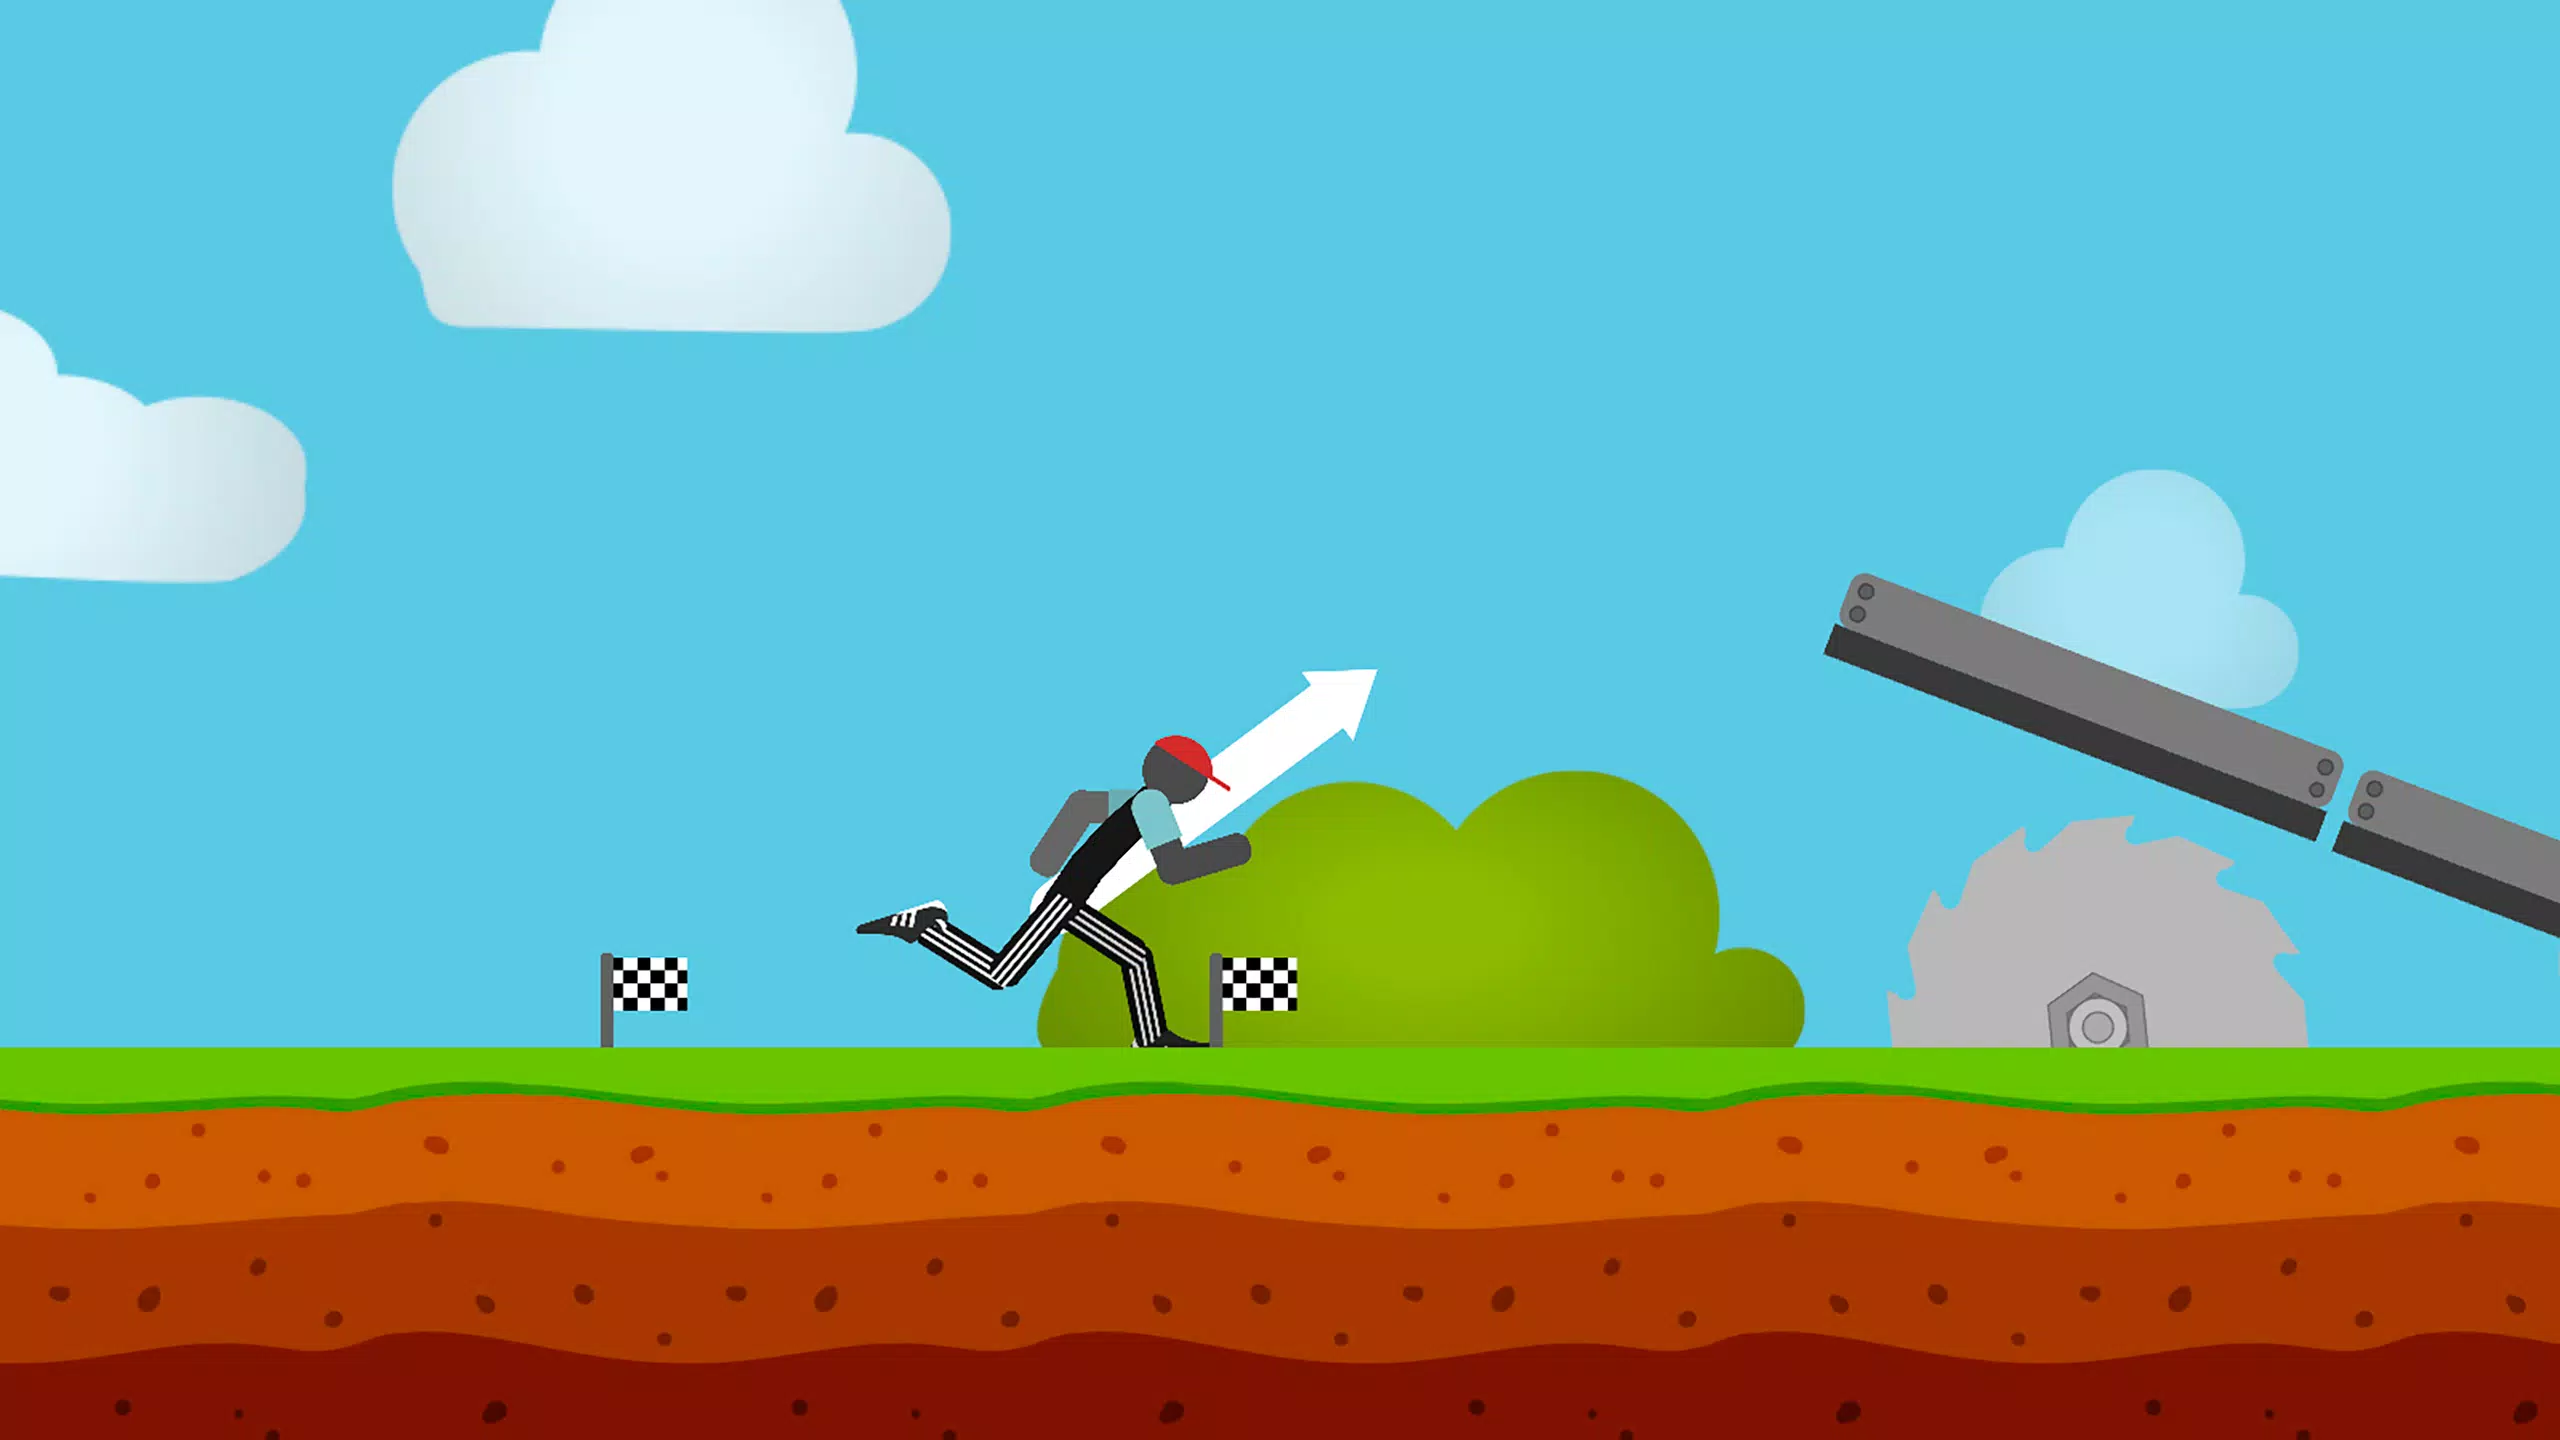 Stickman Ragdoll Playground - Download & Play for Free Here